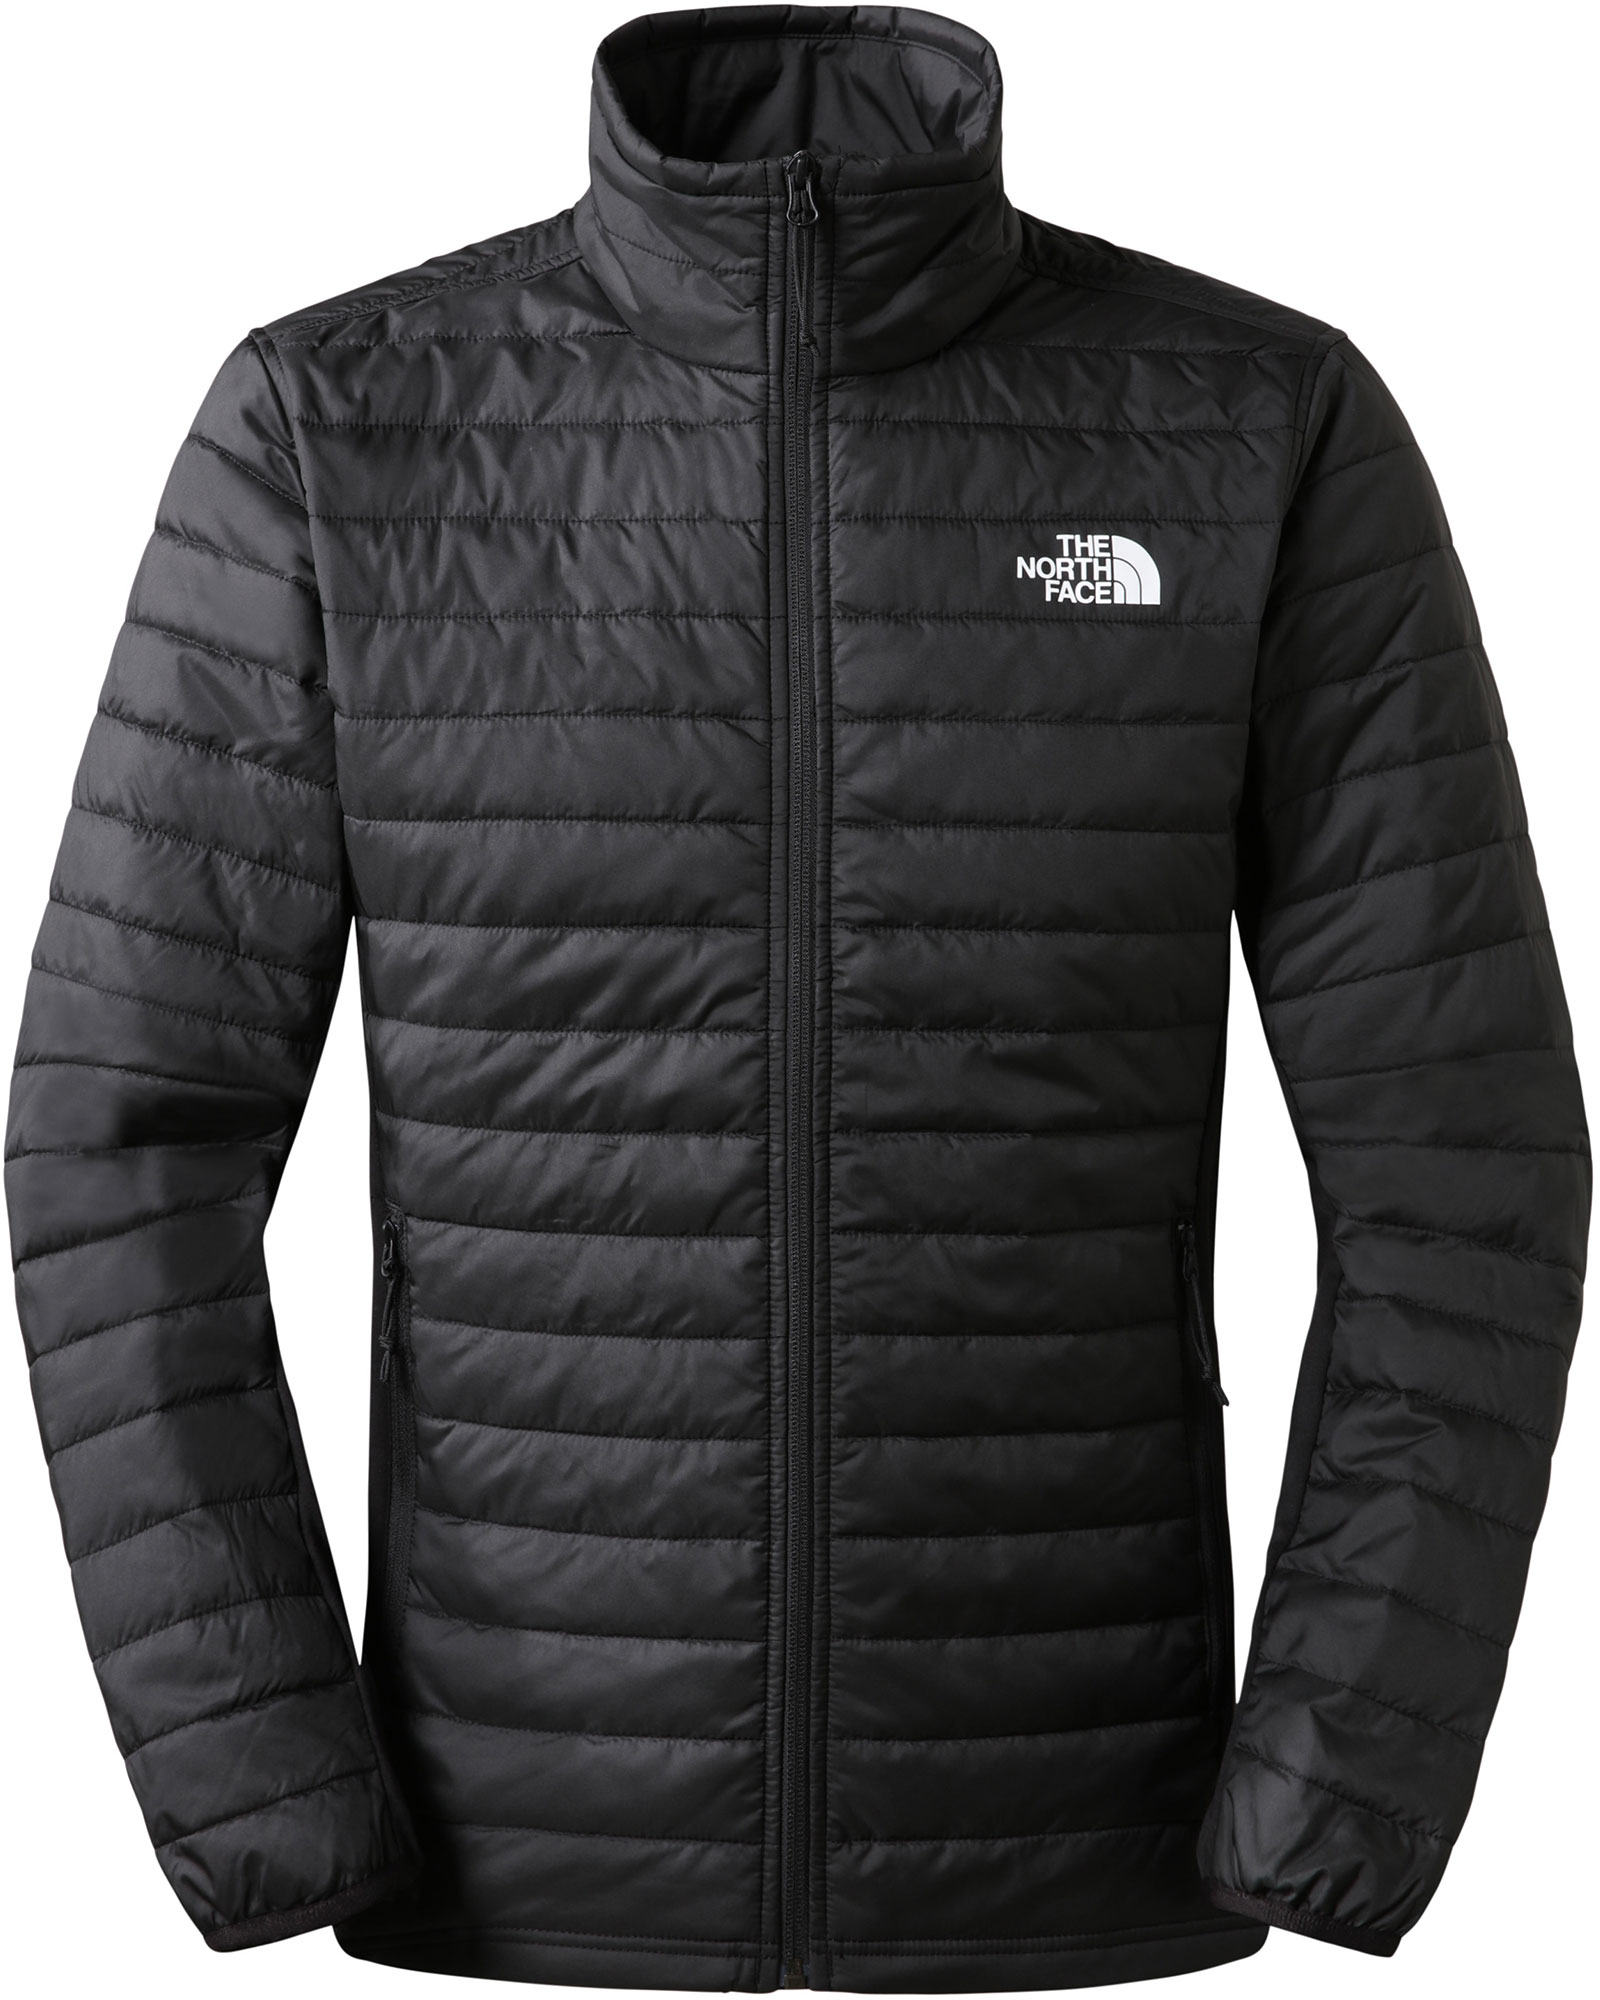 The North Face Canyonlands Hybrid Men’s Insulated Jacket - TNF Black XXL